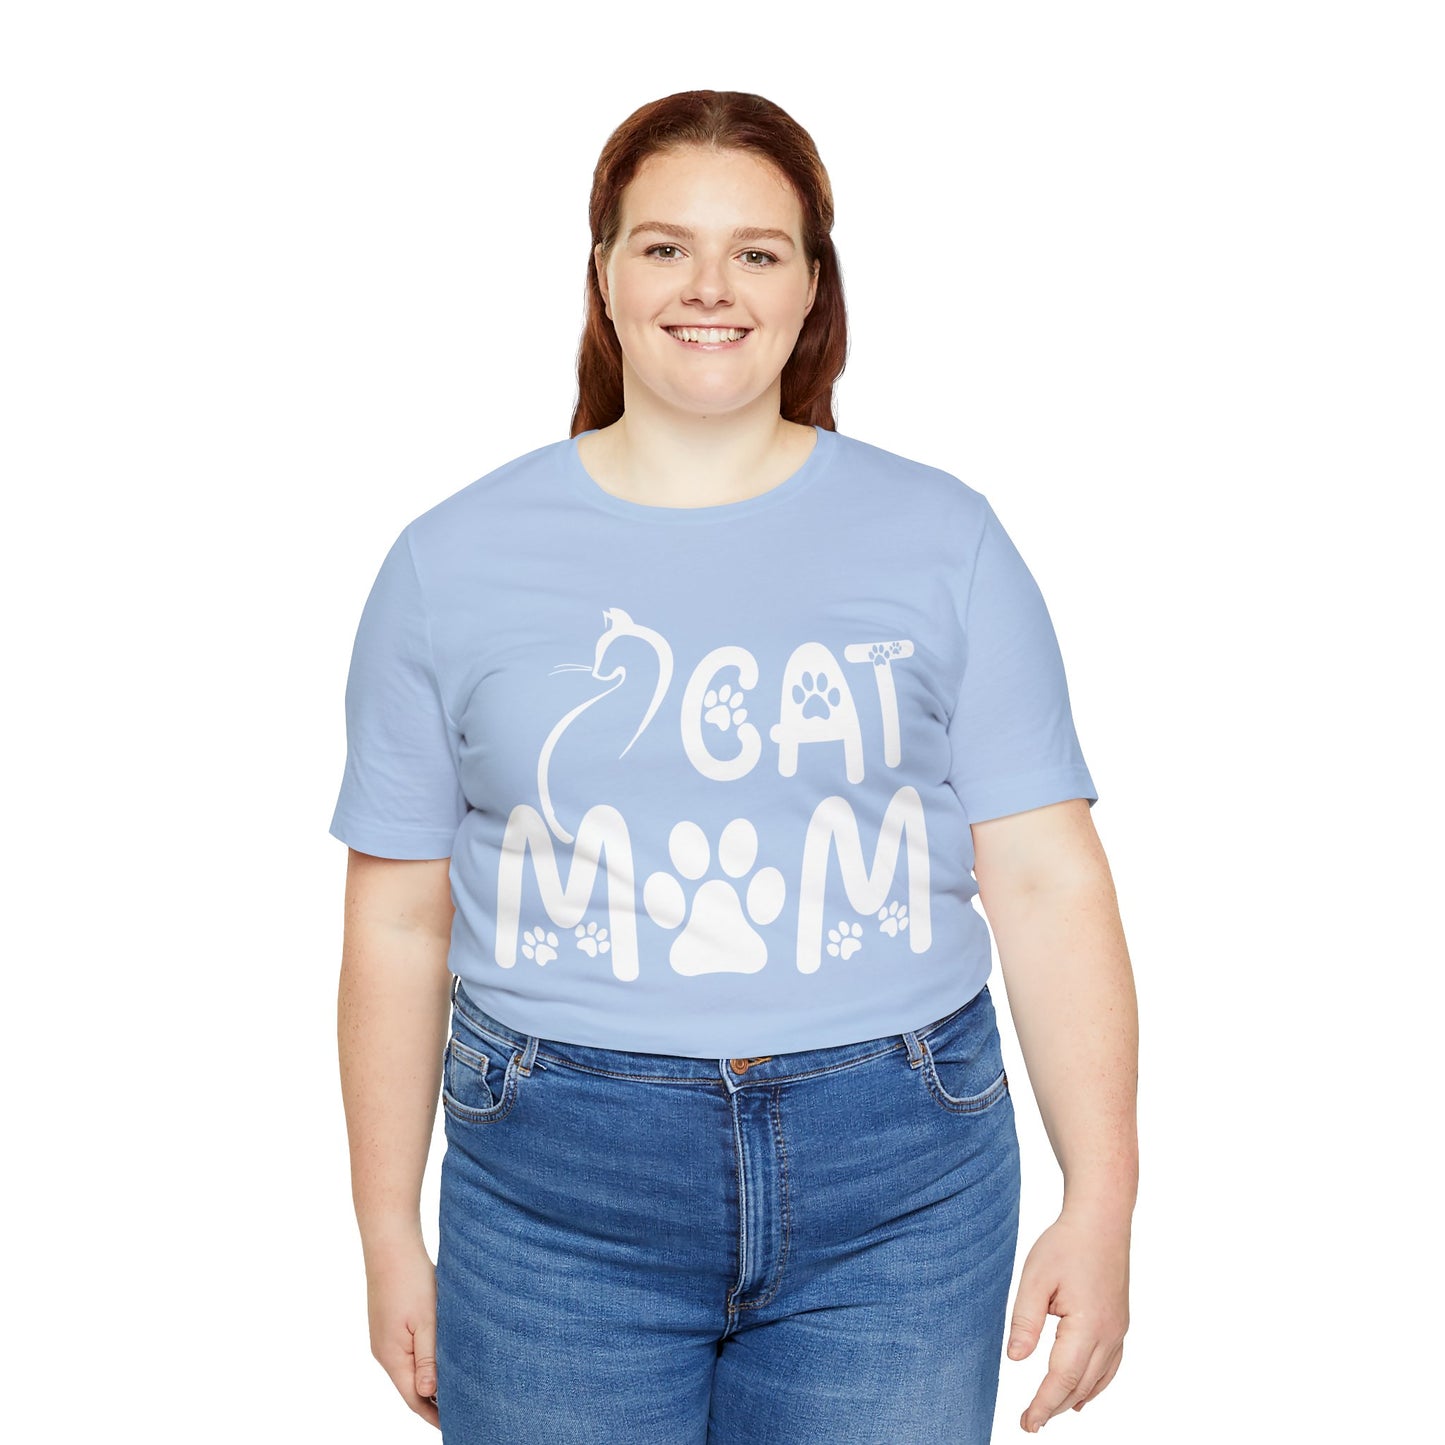 Cat Mom Cat T-Shirts for Feline Enthusiasts - Comfortable, Cute, and Ideal for Cat Lovers!